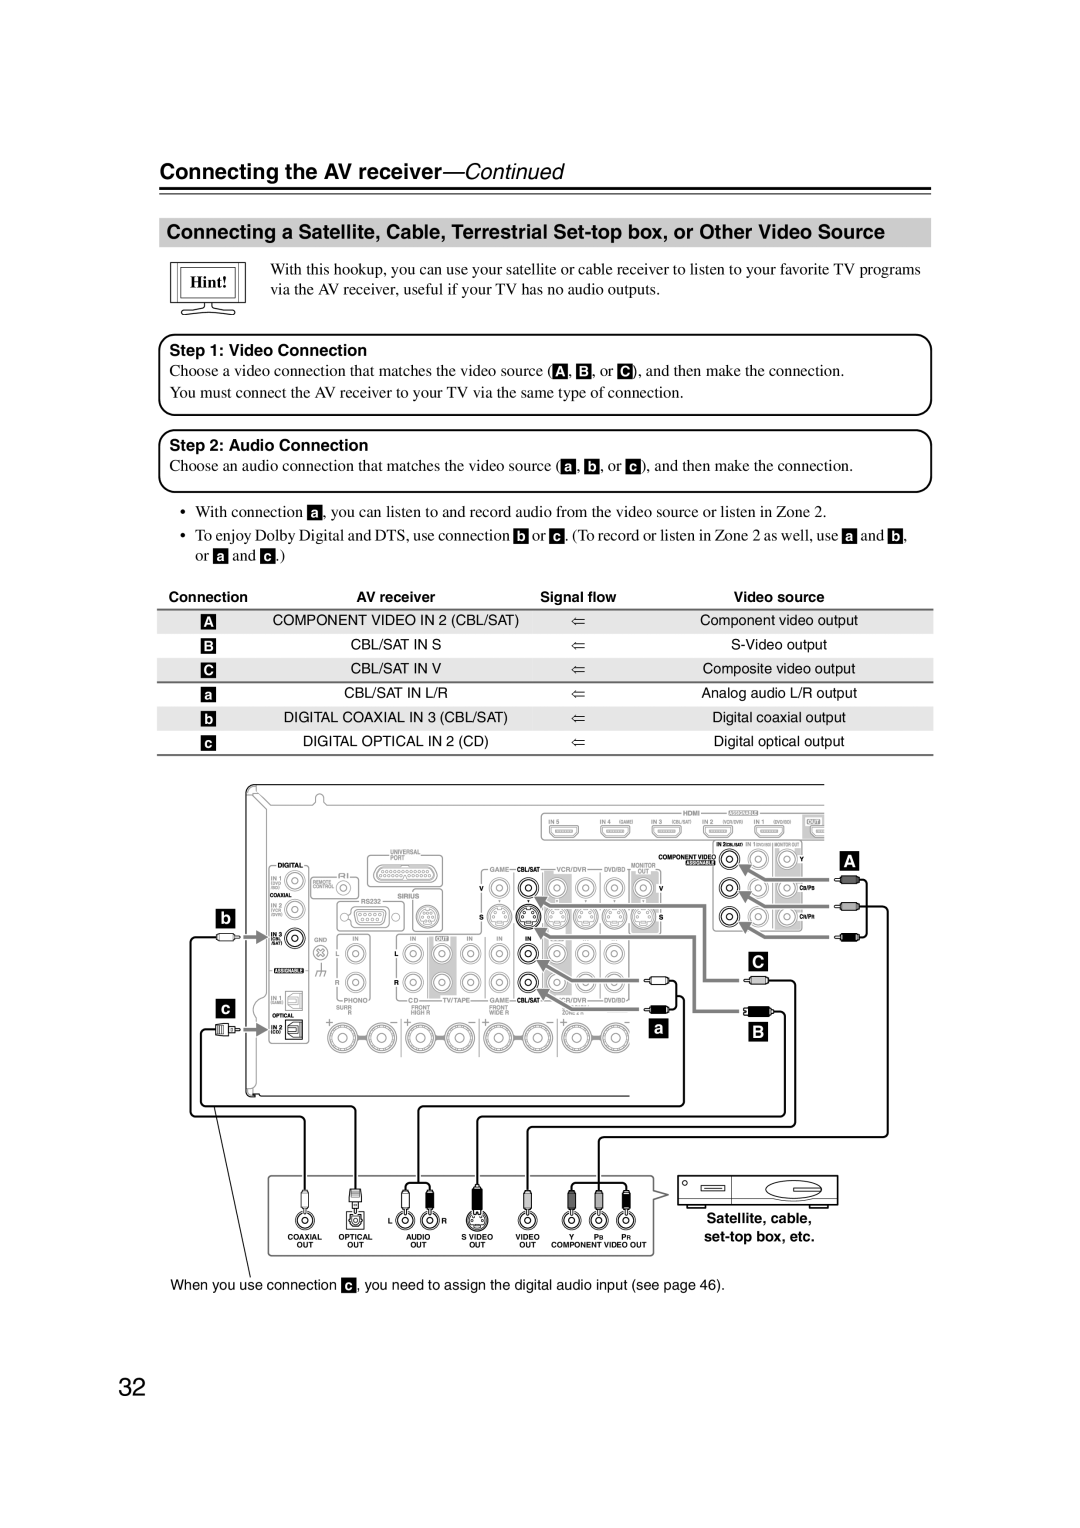 Onkyo TX-SR707 instruction manual Connecting the AV receiver—Continued, Hint 